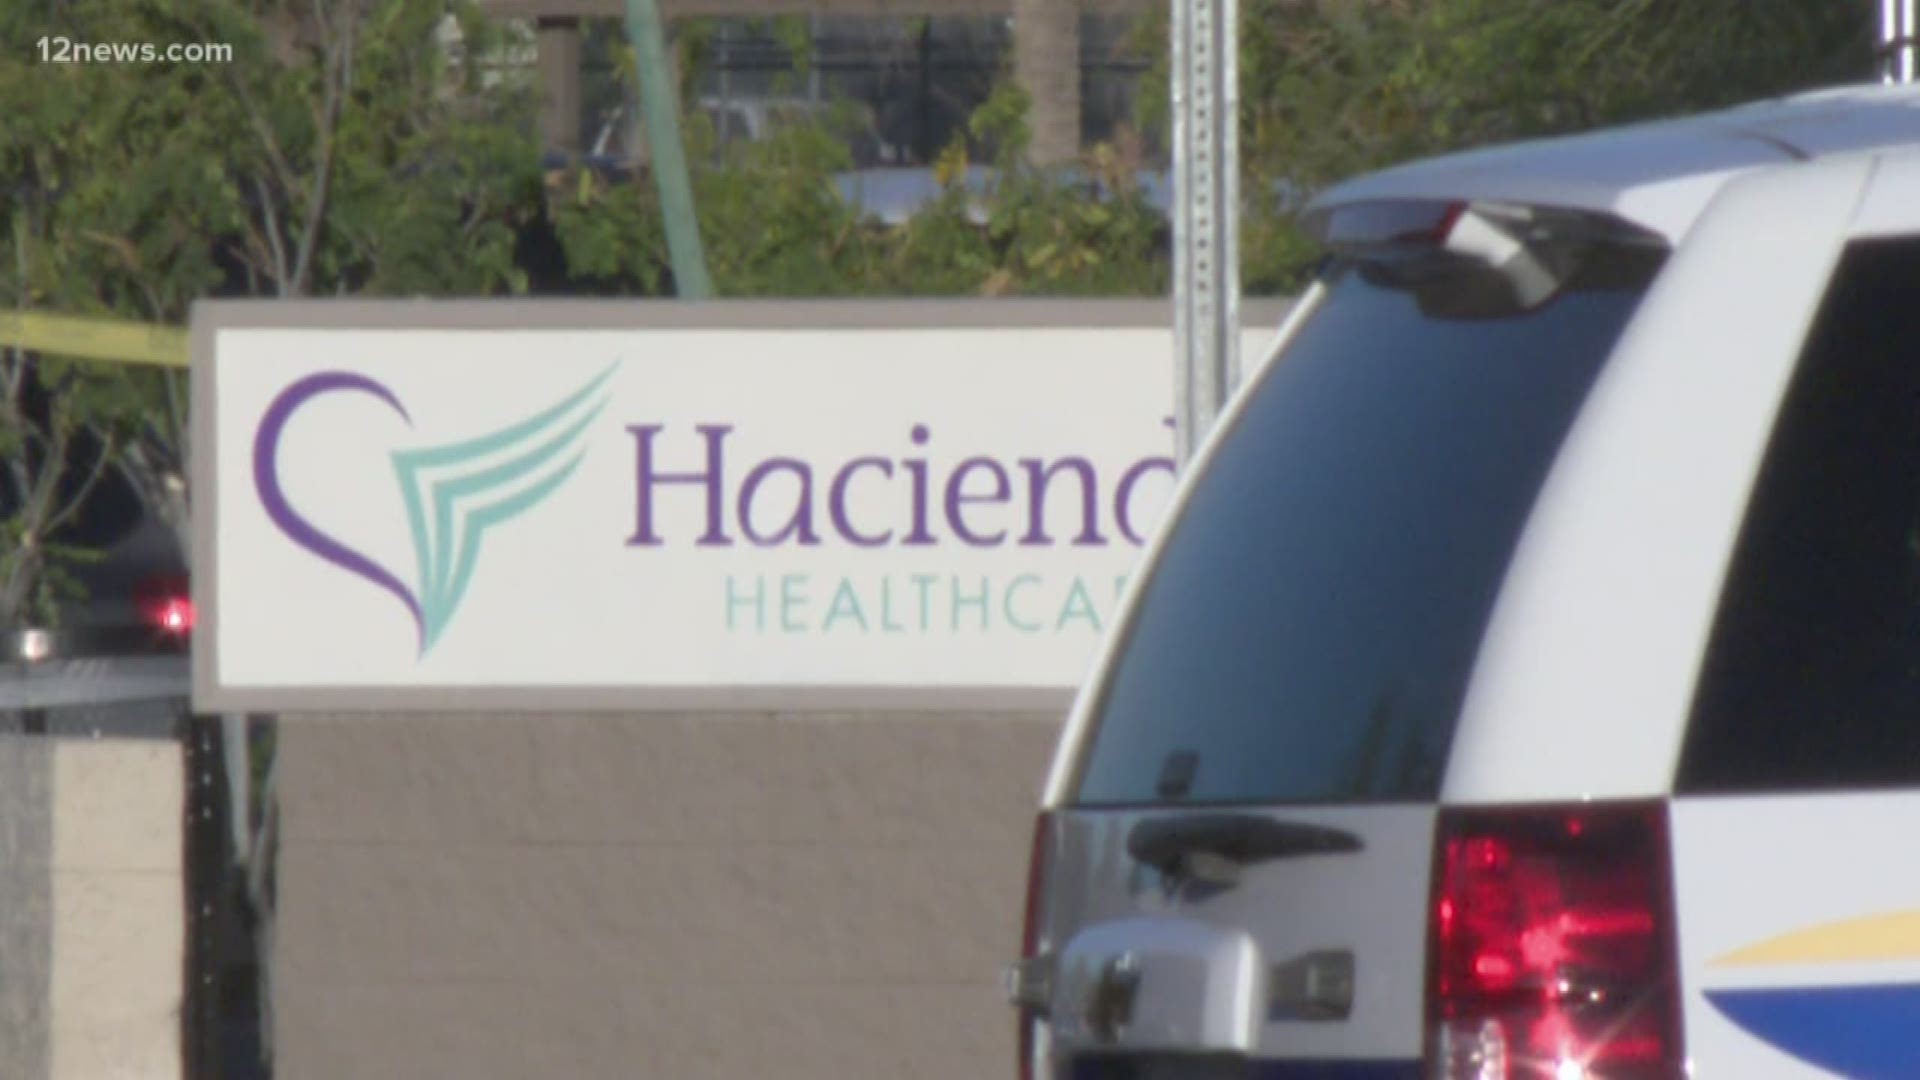 Gunfire erupted at Hacienda Healthcare, the facility where an incapacitated woman gave birth to a baby boy in December, early Monday morning. Investigators say a security guard at the facility was forced to shoot a man in the parking lot who is now in the hospital with life-threatening injuries.